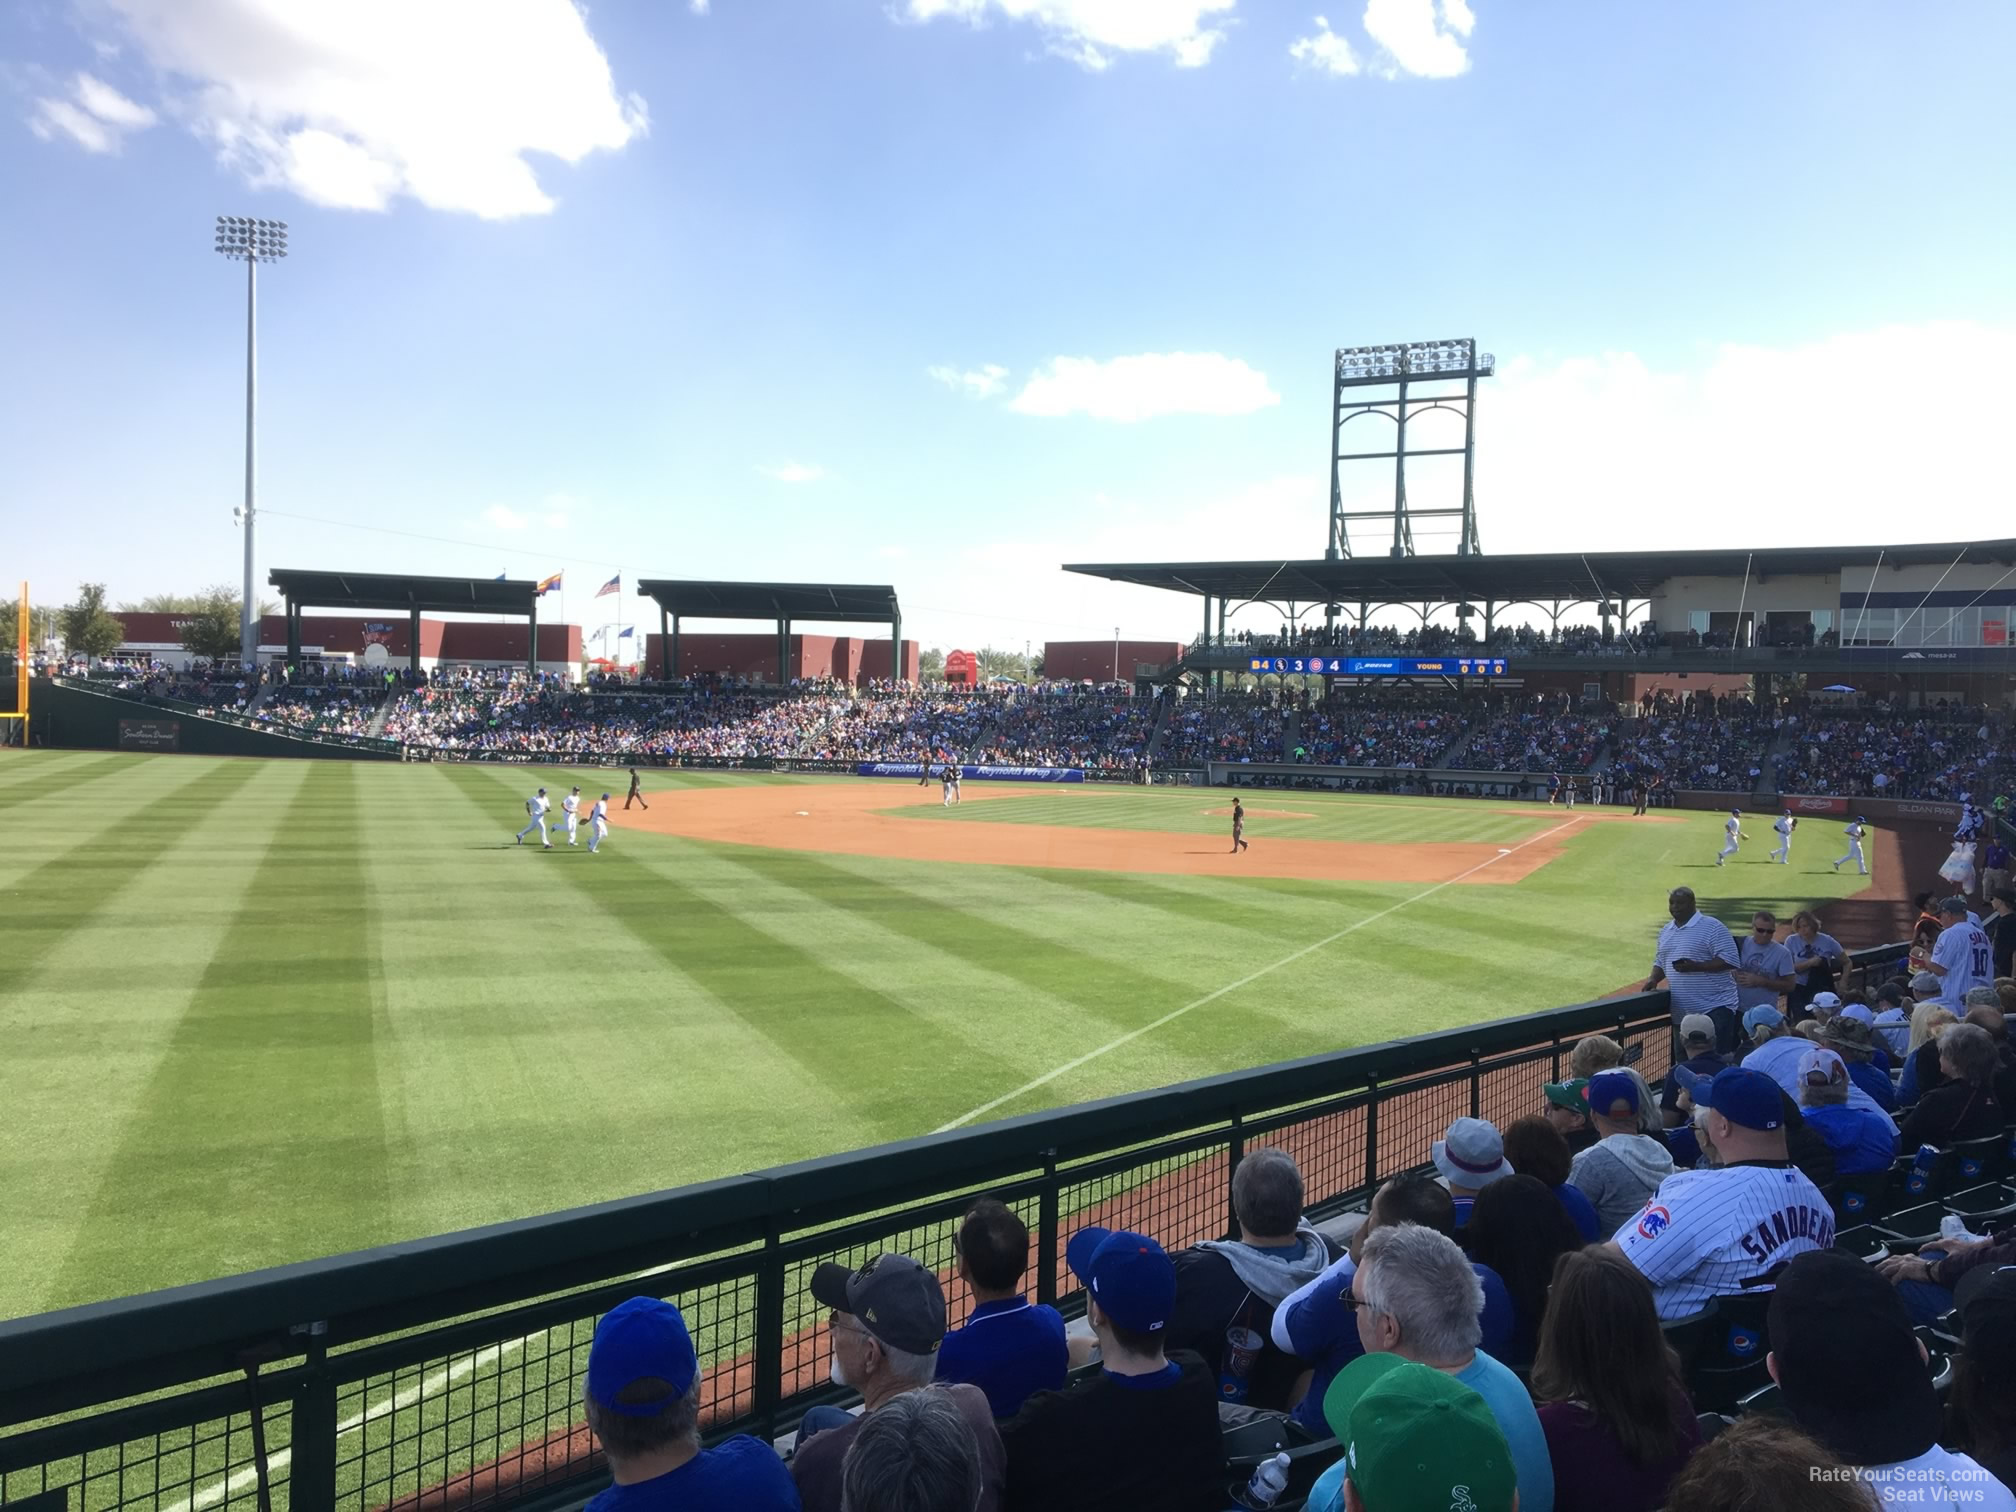 section 101, row 16 seat view  - sloan park